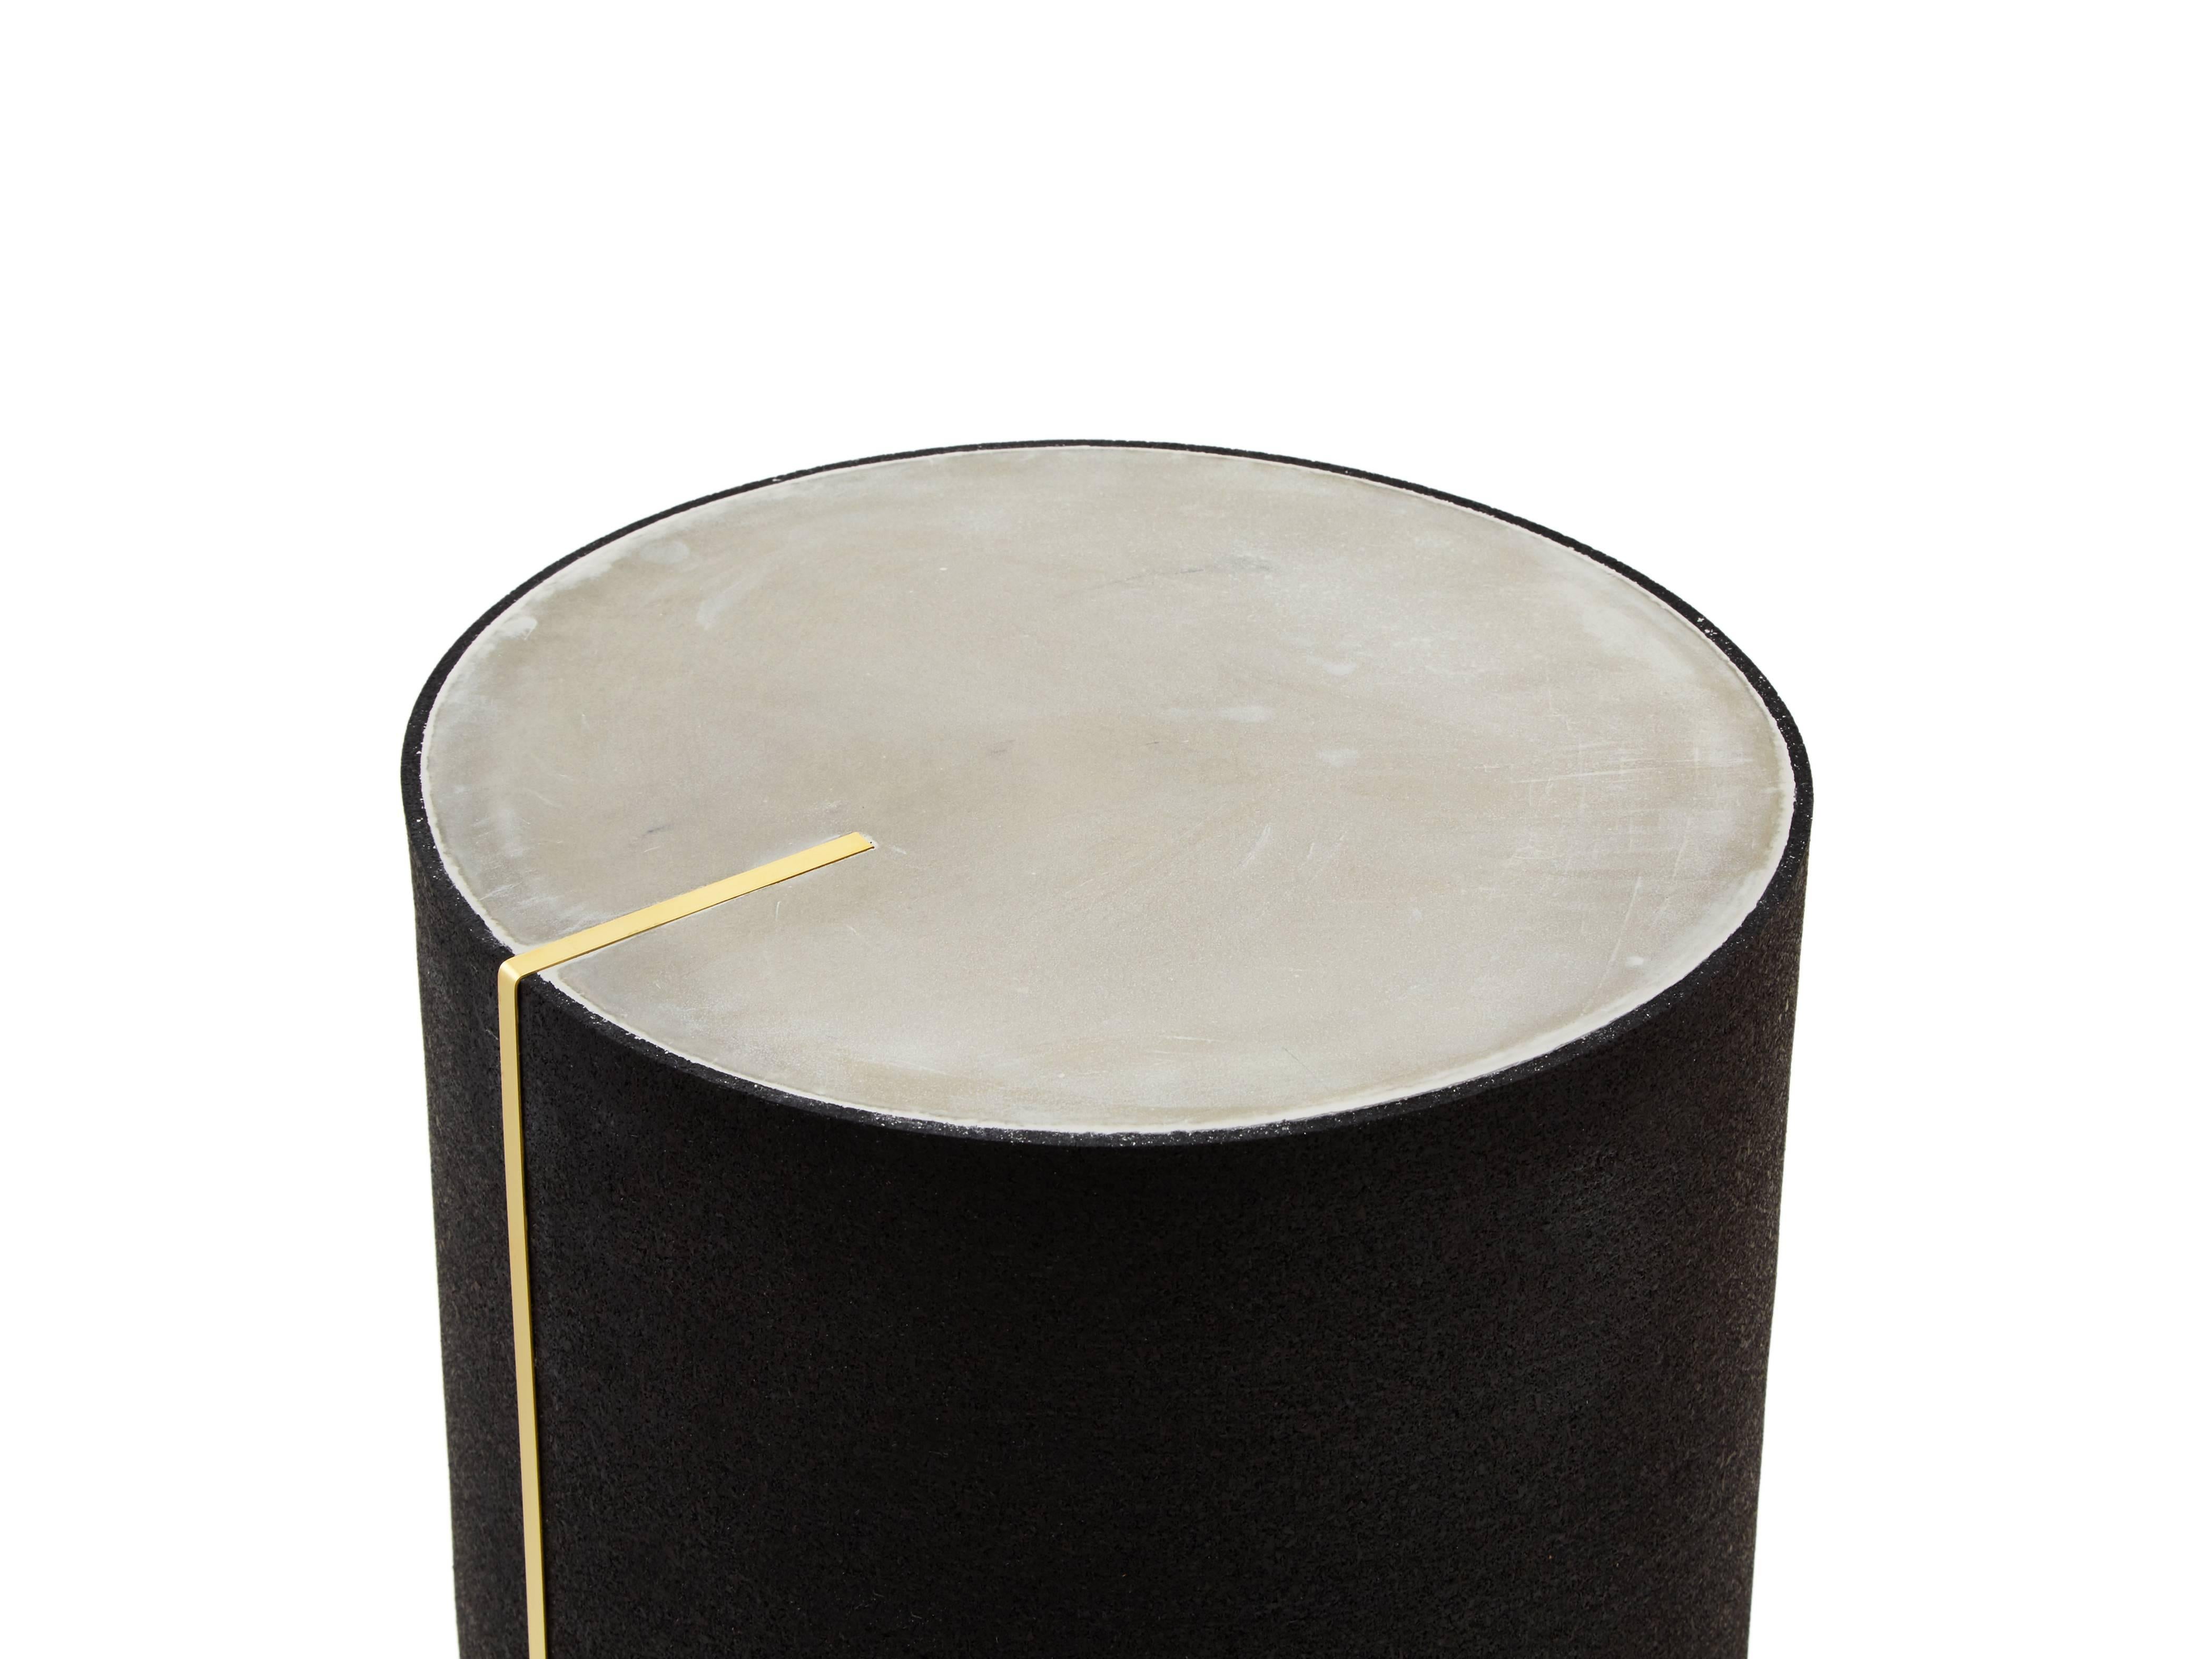 Rubber and concrete cylinder cast with a brass inlay.
Also available in speckled black, royal, and gris.

Measures: Diameter 10